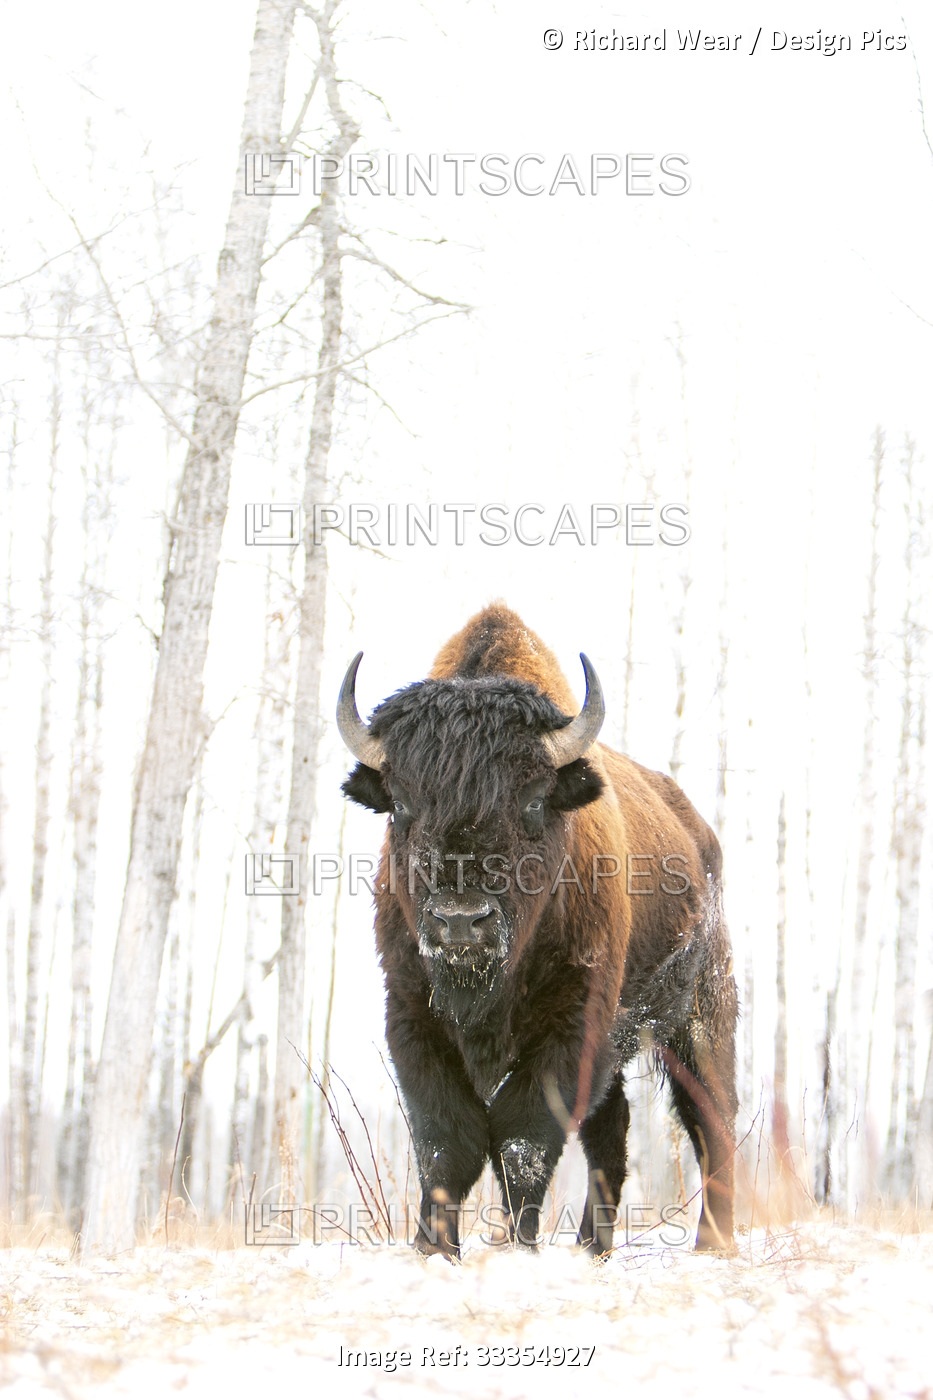 Wood bison (Bison bison athabascae) staring at the camera in a forest in winter ...